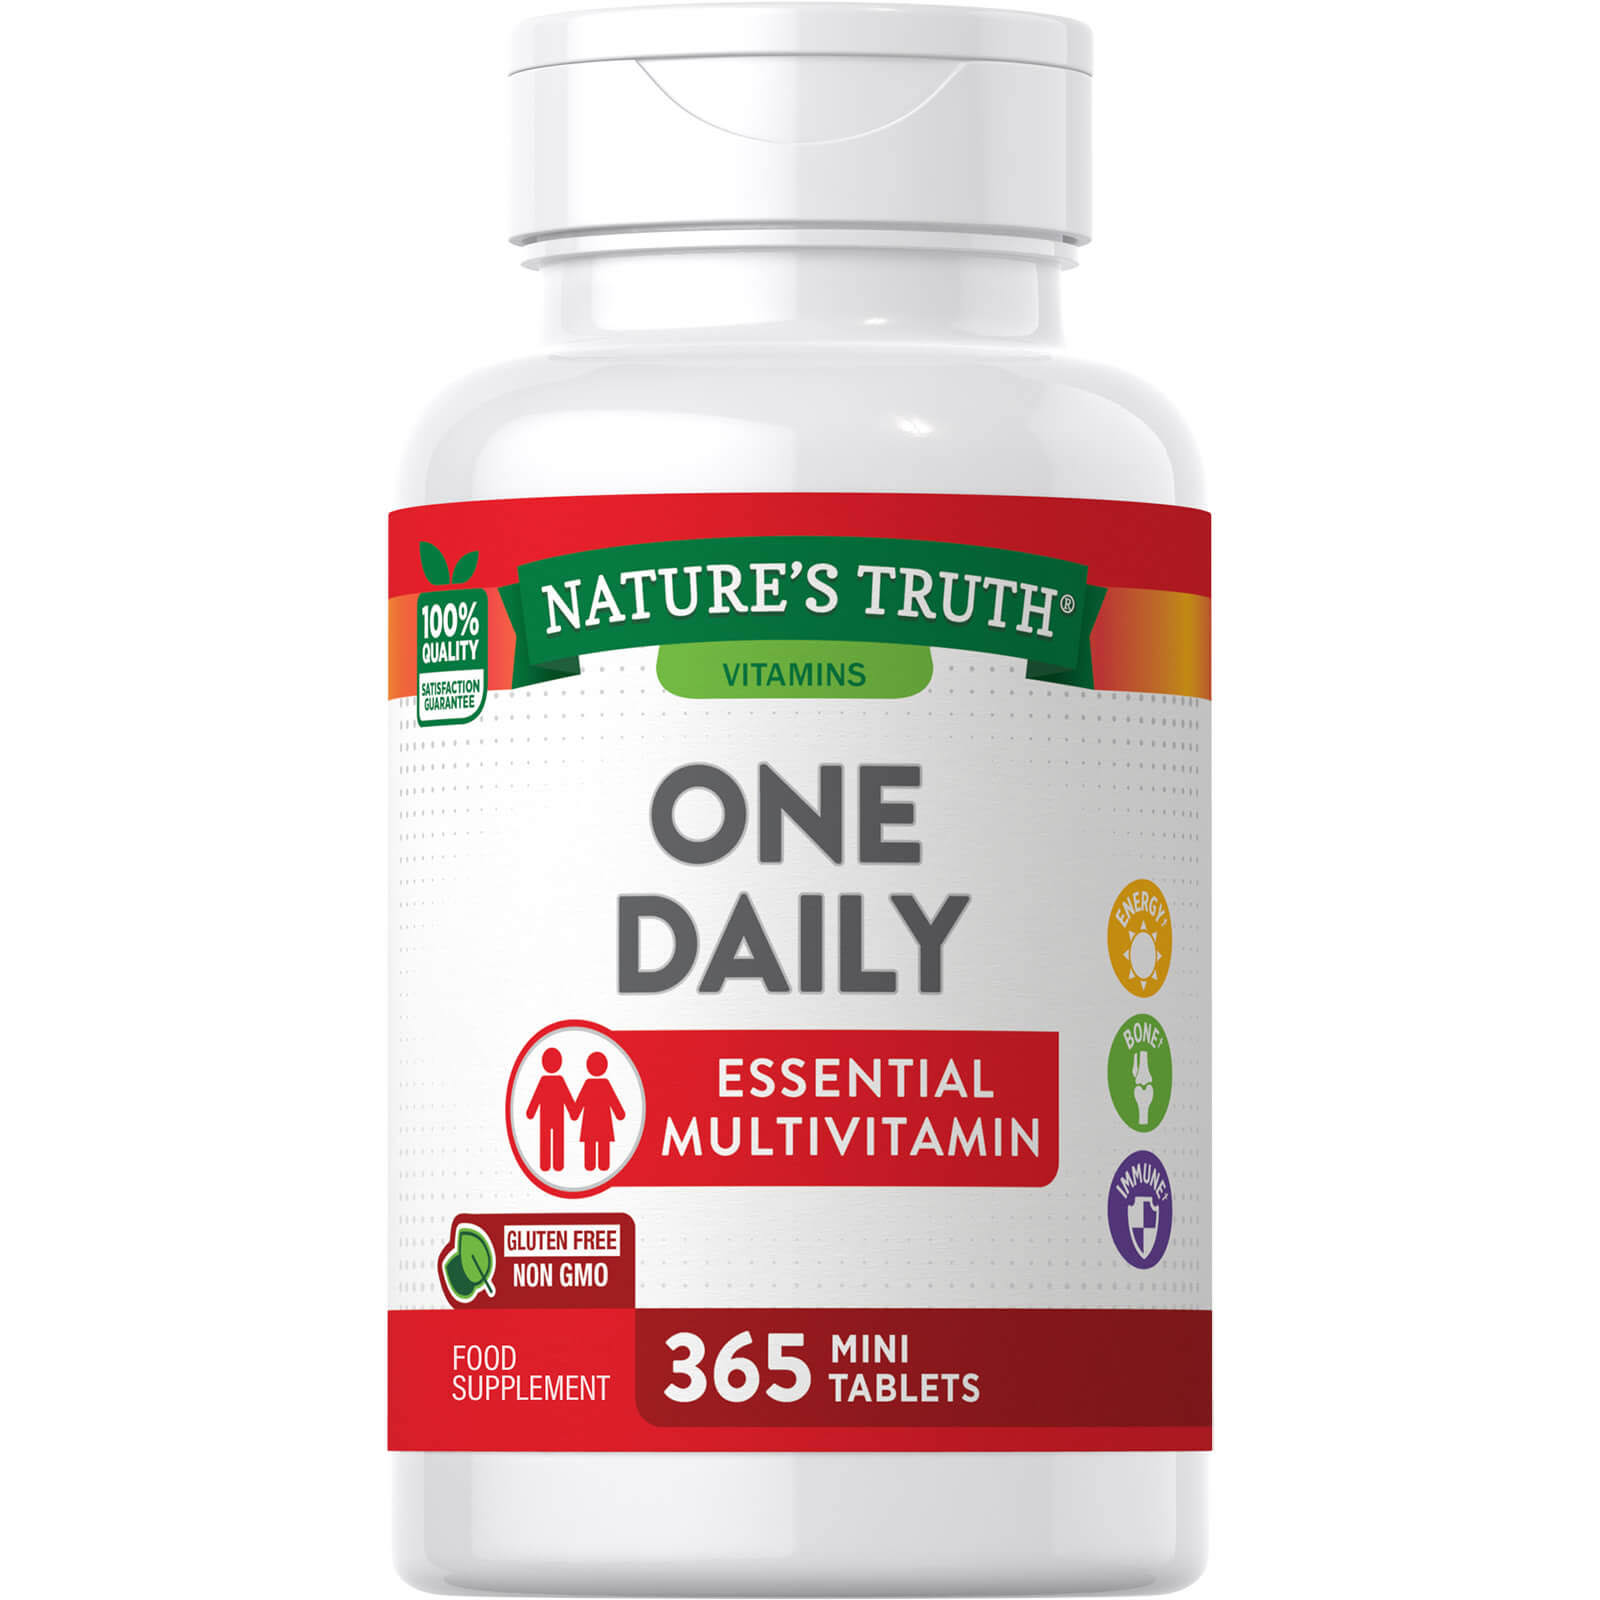 One Daily Essential Multivitamin - 365 Tablets - Nature's Truth UK